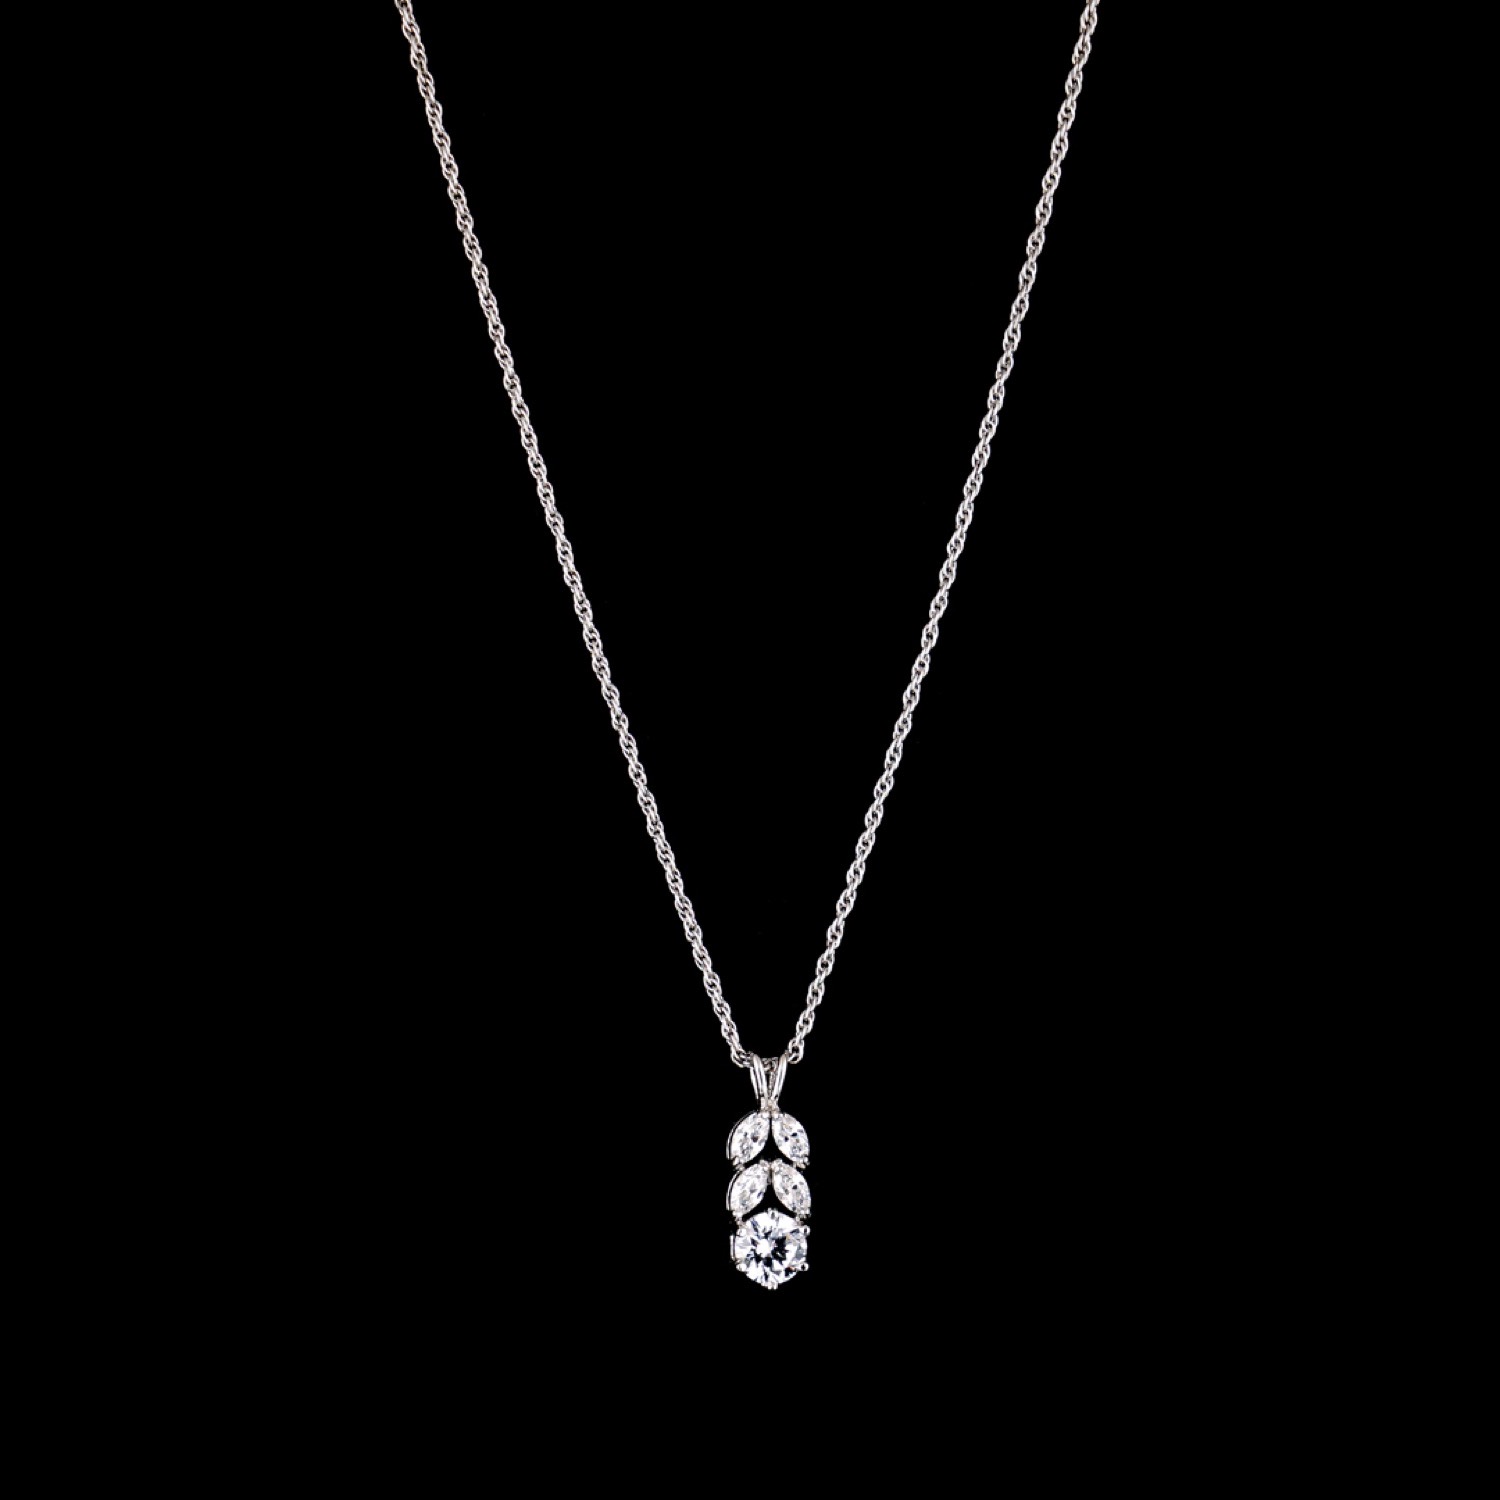 varam_chains_leaf_and_bud_shaped_pendant_with_silver_chain-1